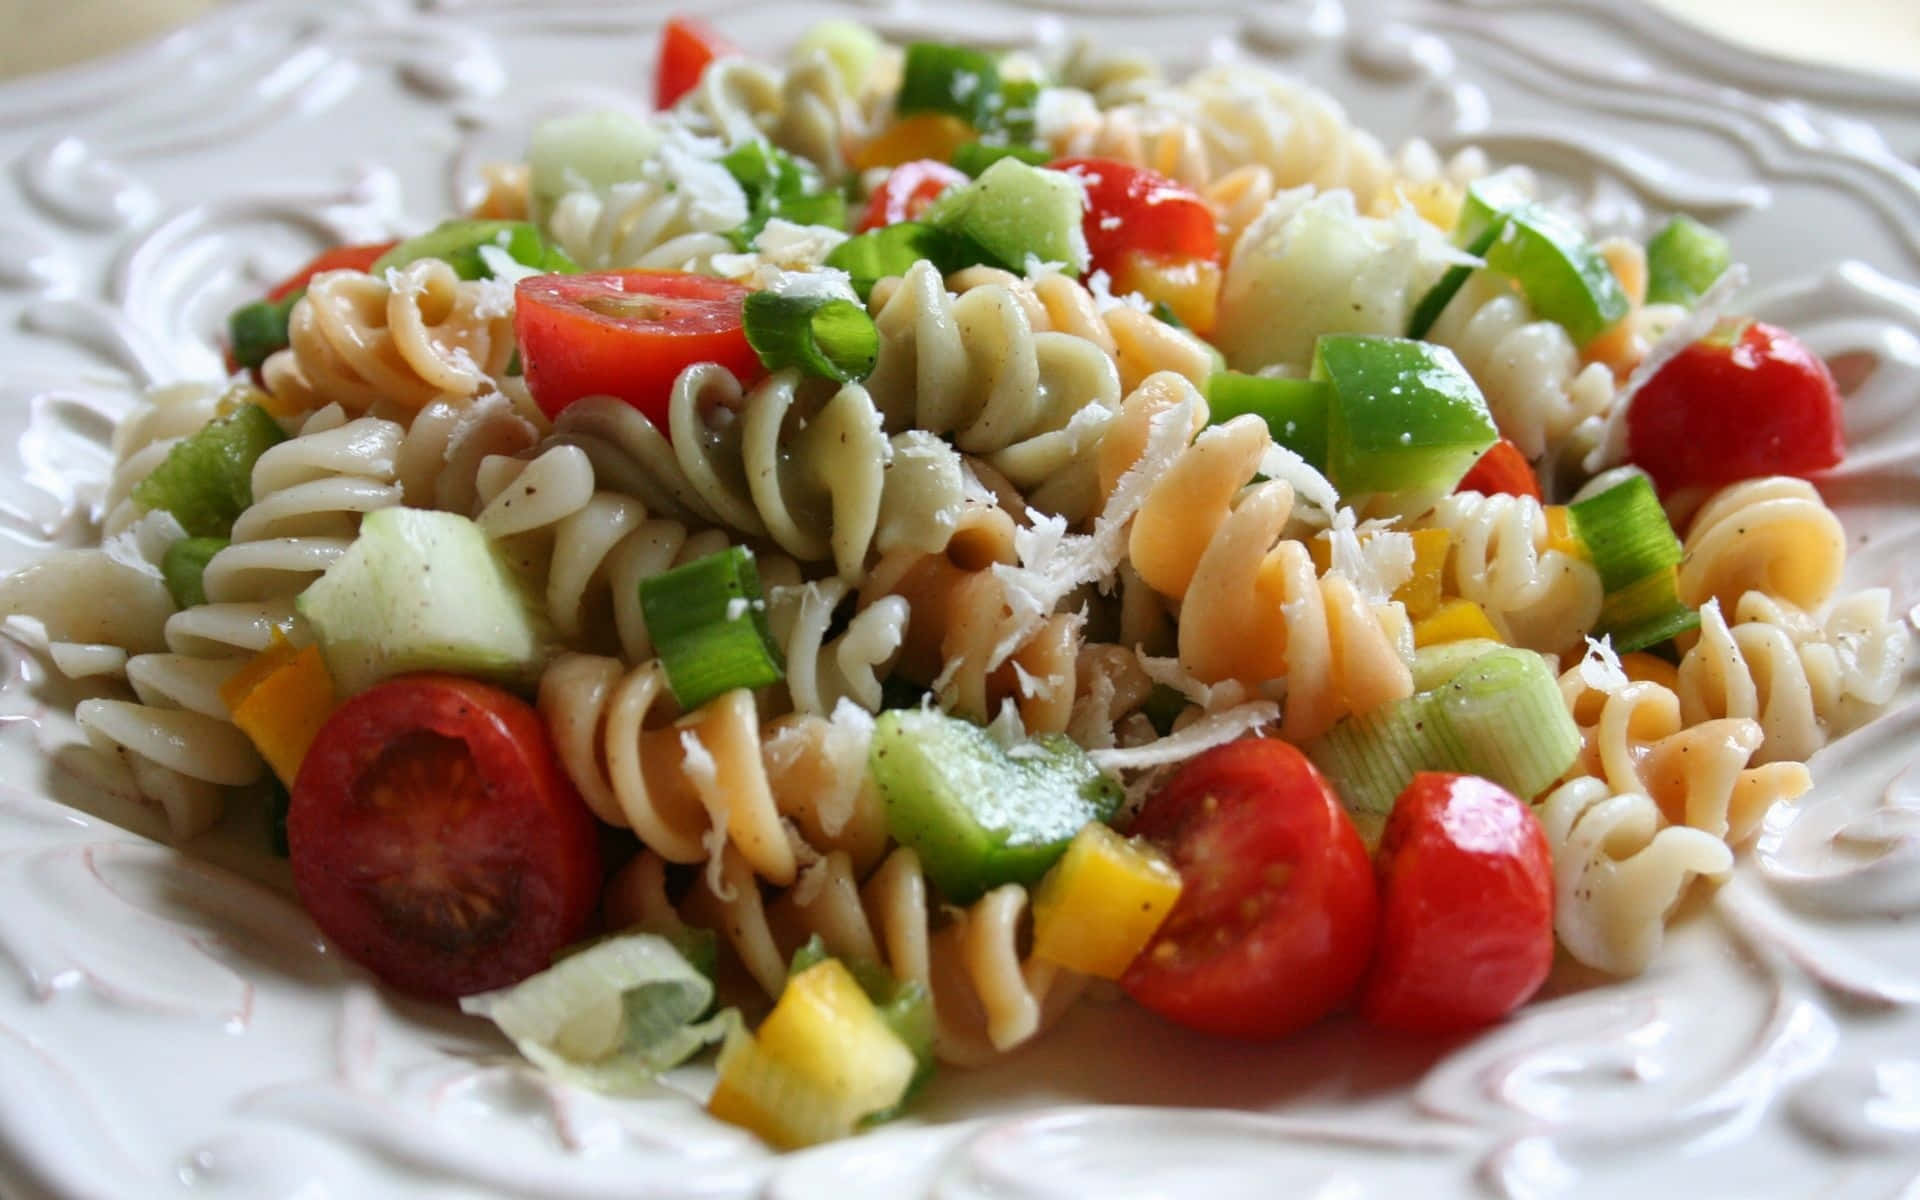 A Plate Of Pasta Salad With Tomatoes And Cucumbers